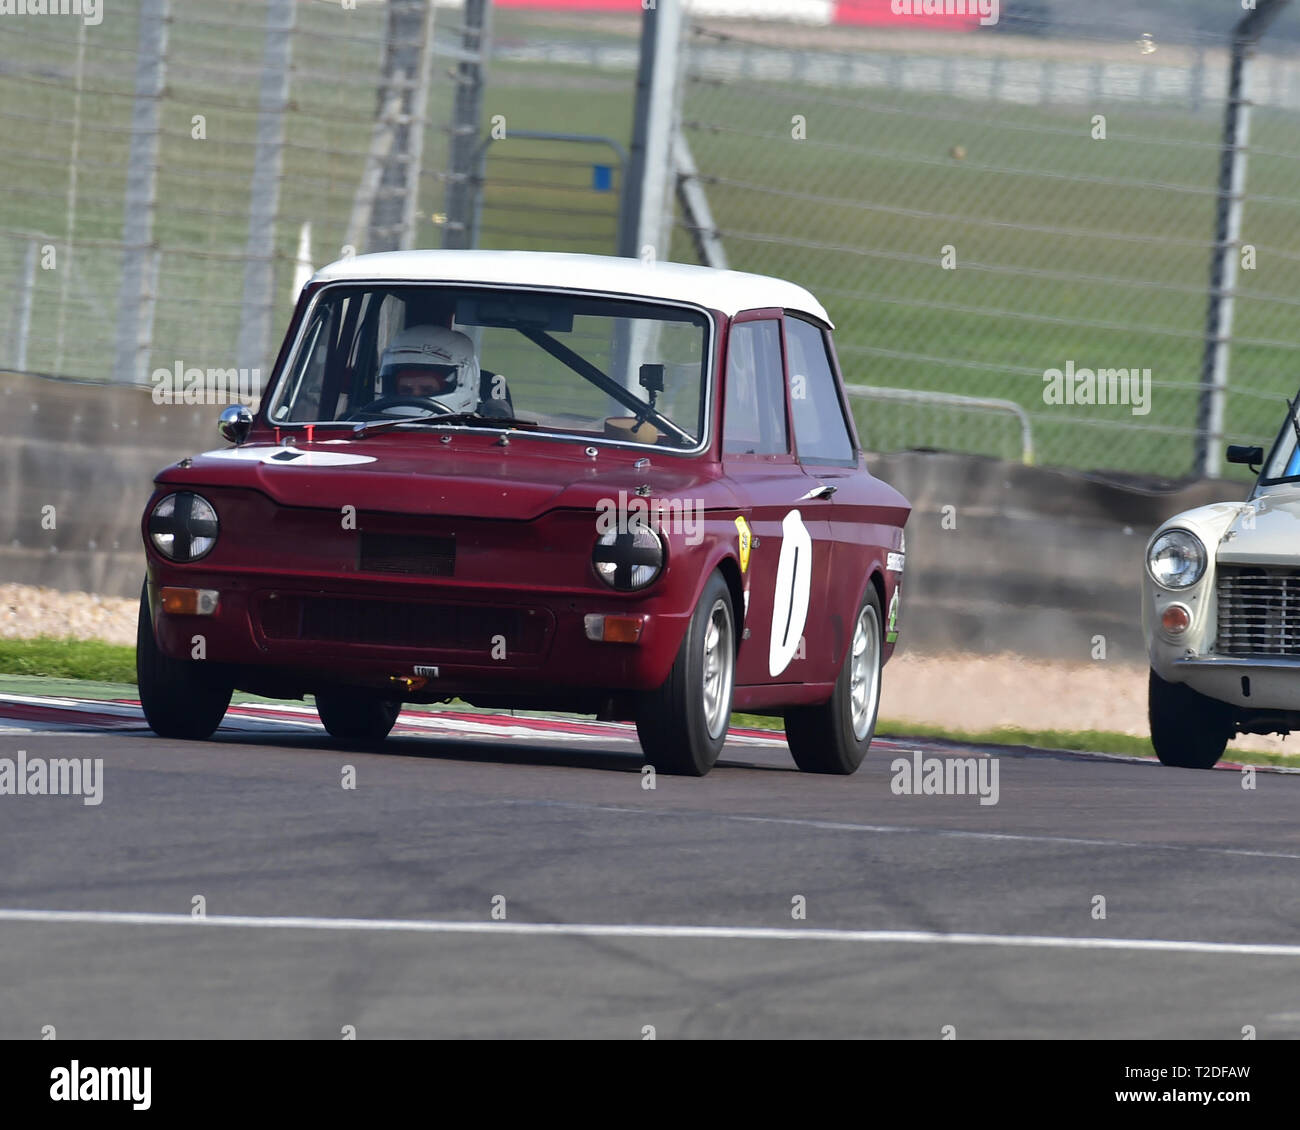 Adrian Oliver, Hillman Imp, Historic Touring Cars, HSCC, Season Opener, Saturday, 30th March 2019, Donington Park, circuit racing, CJM Photography, cl Stock Photo